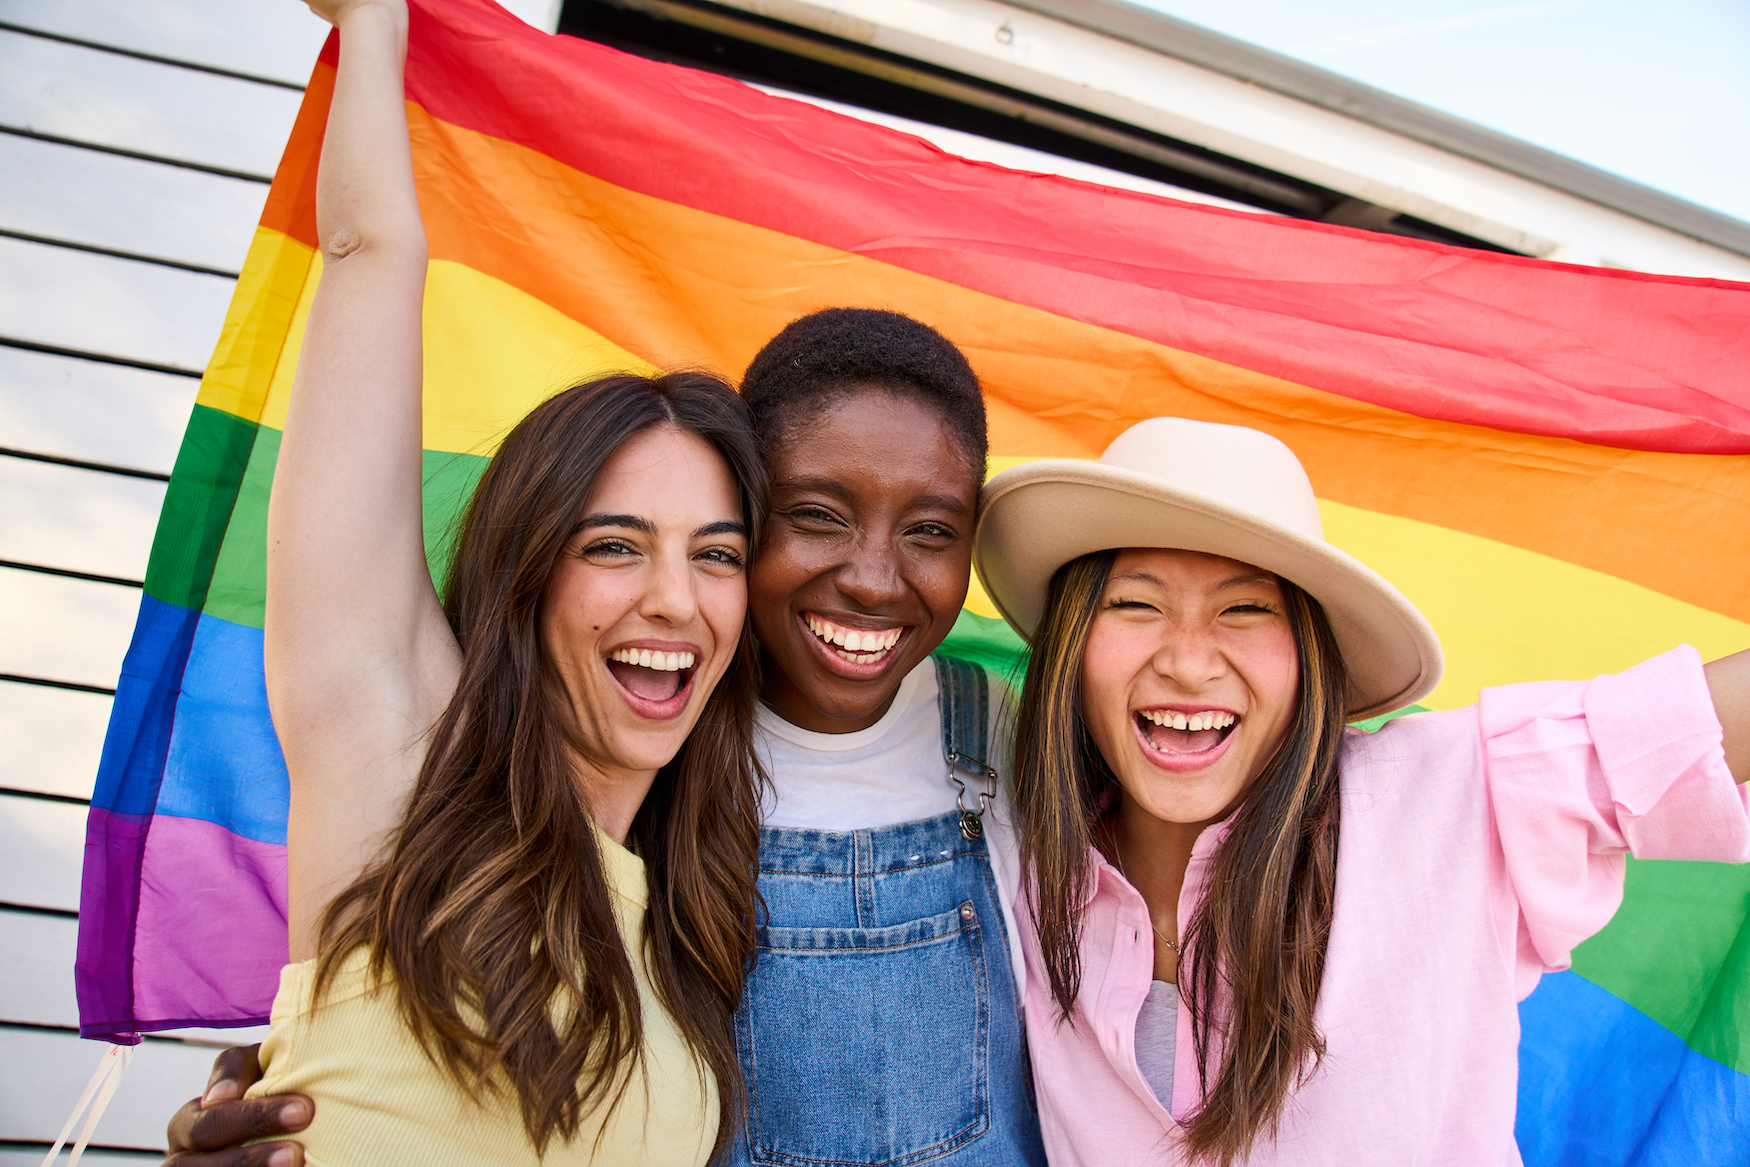 People smiling and rocking the LGBTQ flag